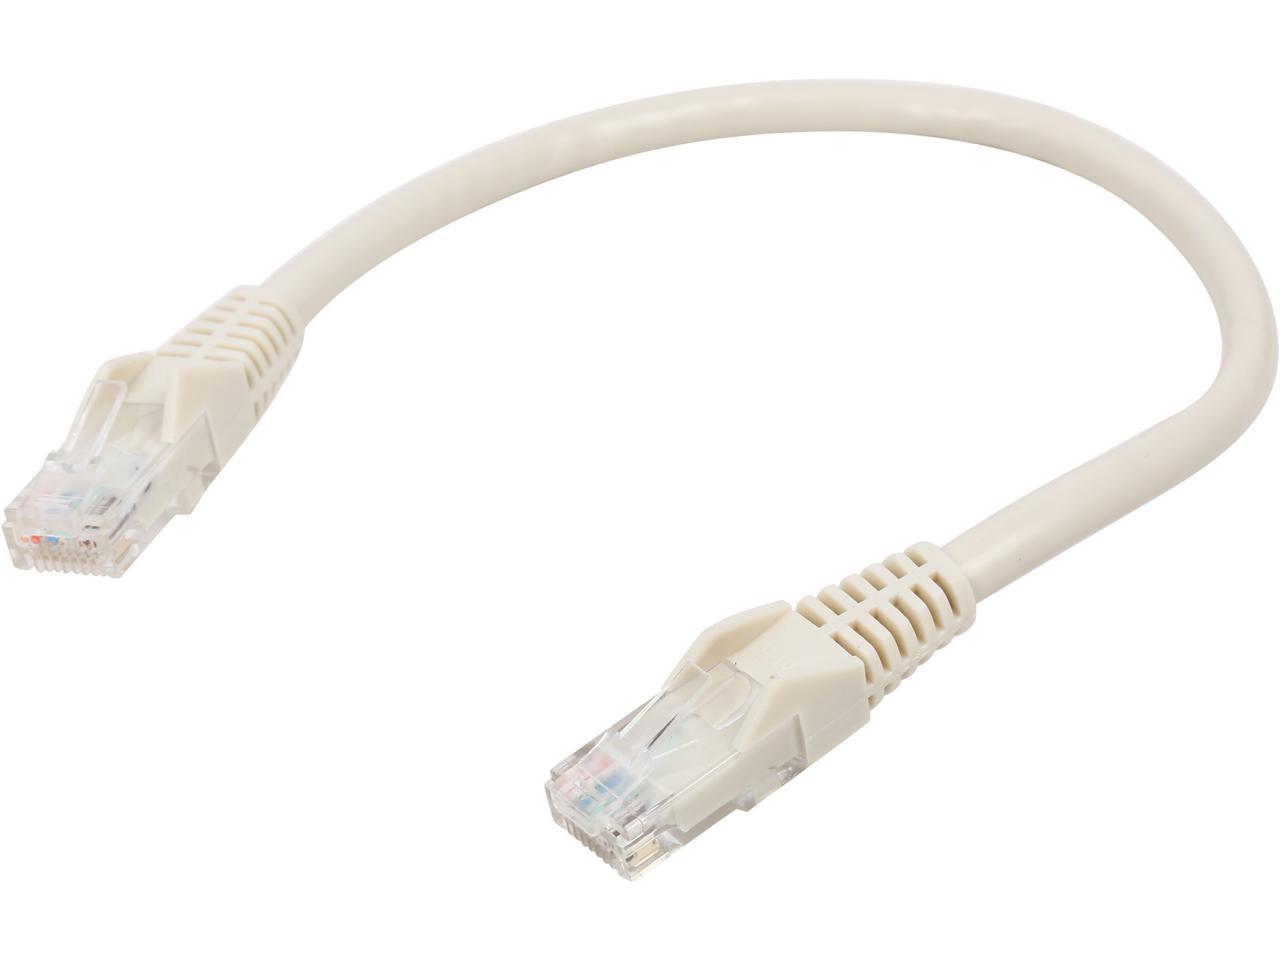 TRIPP LITE N201-001-WH 1 ft. Cat 6 White Gigabit Snagless Molded Patch Cable